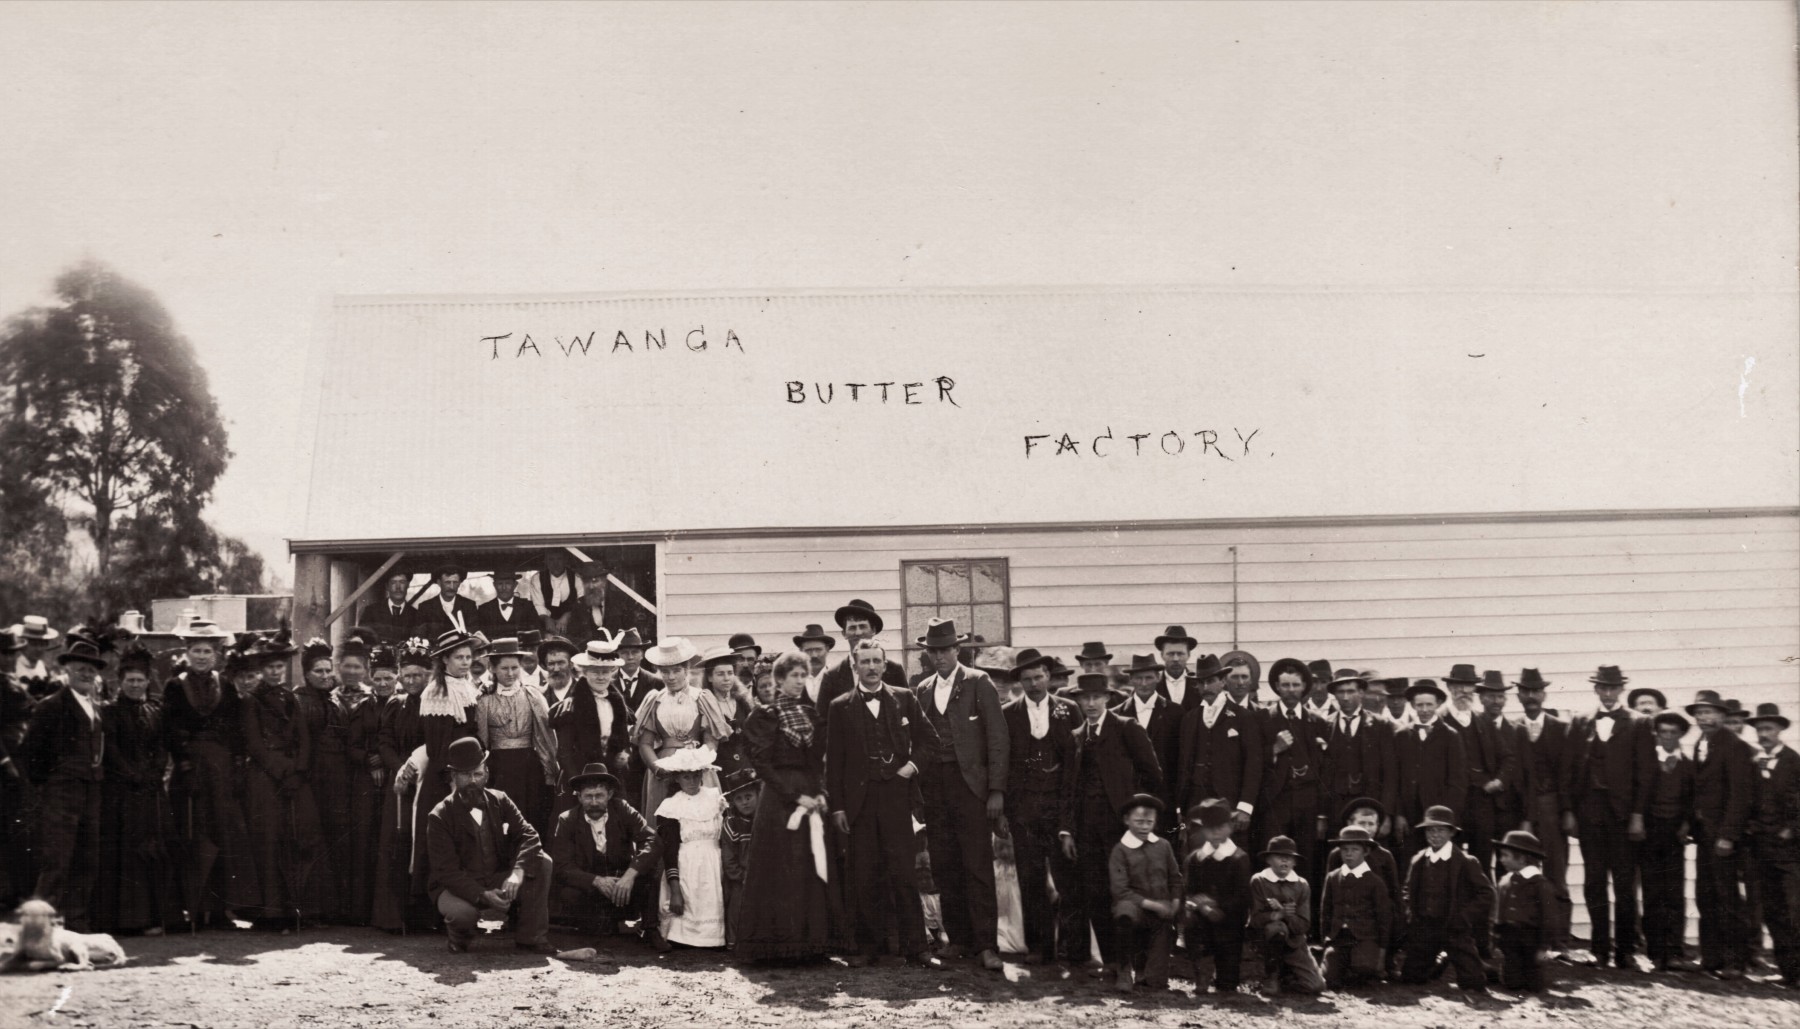 opening-of-the-Tawonga-Butter-Factory-1902